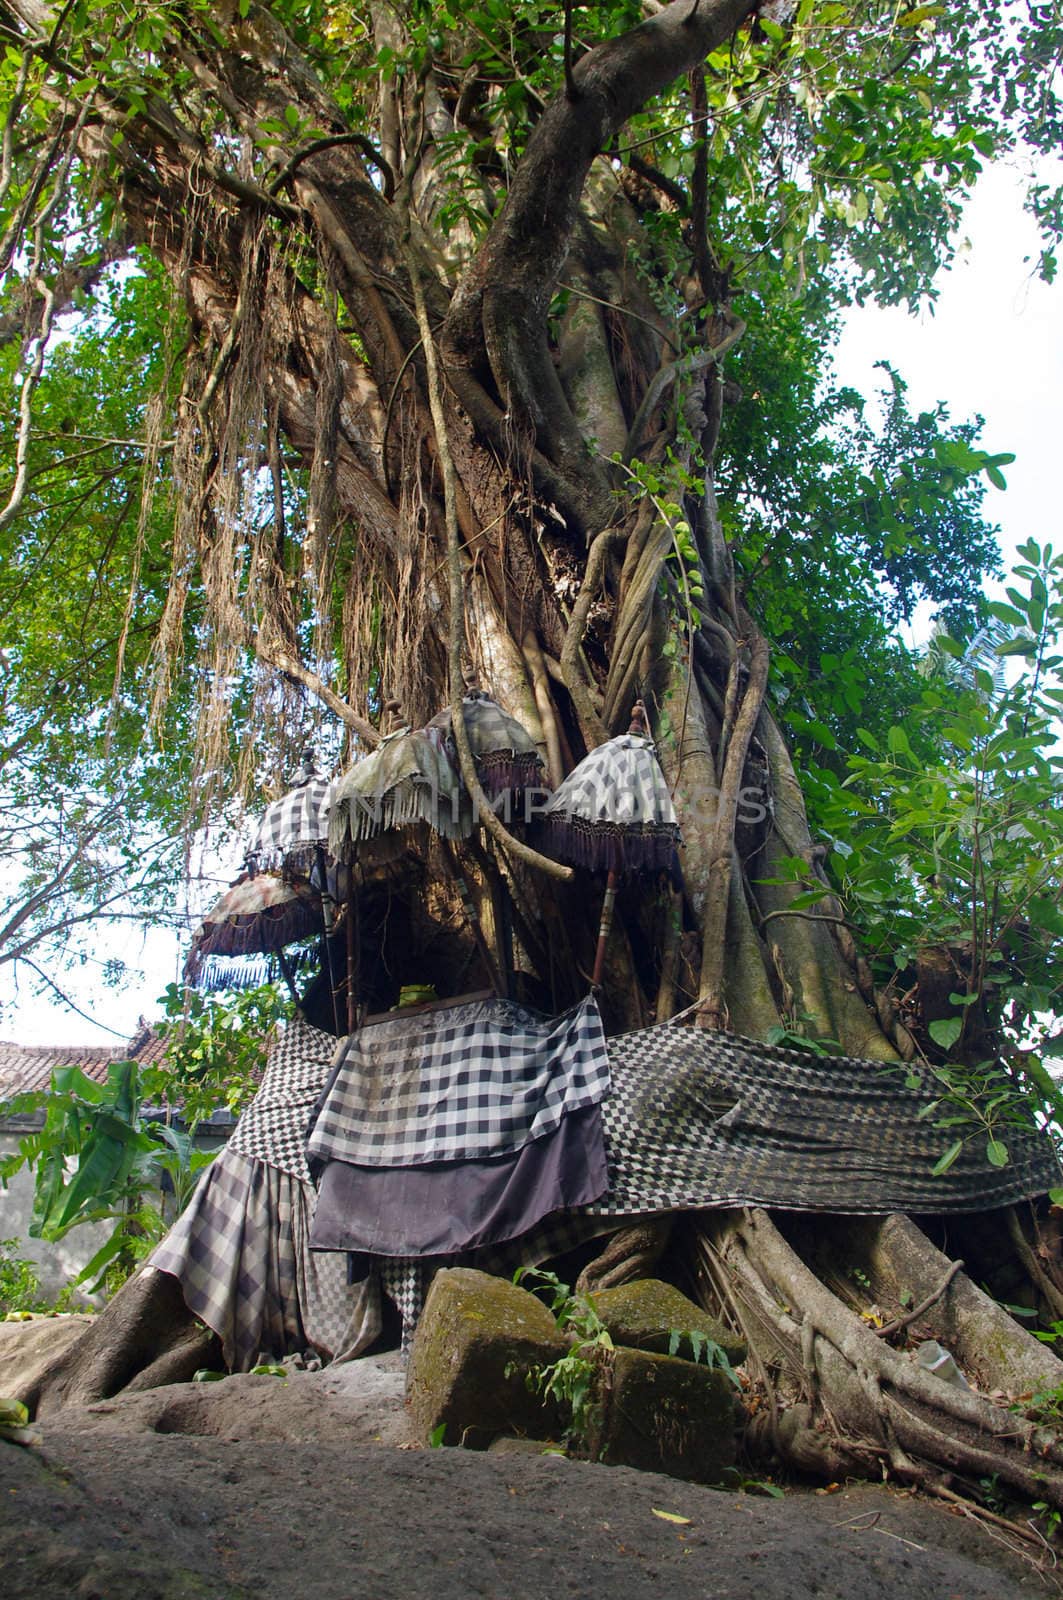 Offerings at a Banyan tree in bali by Komar